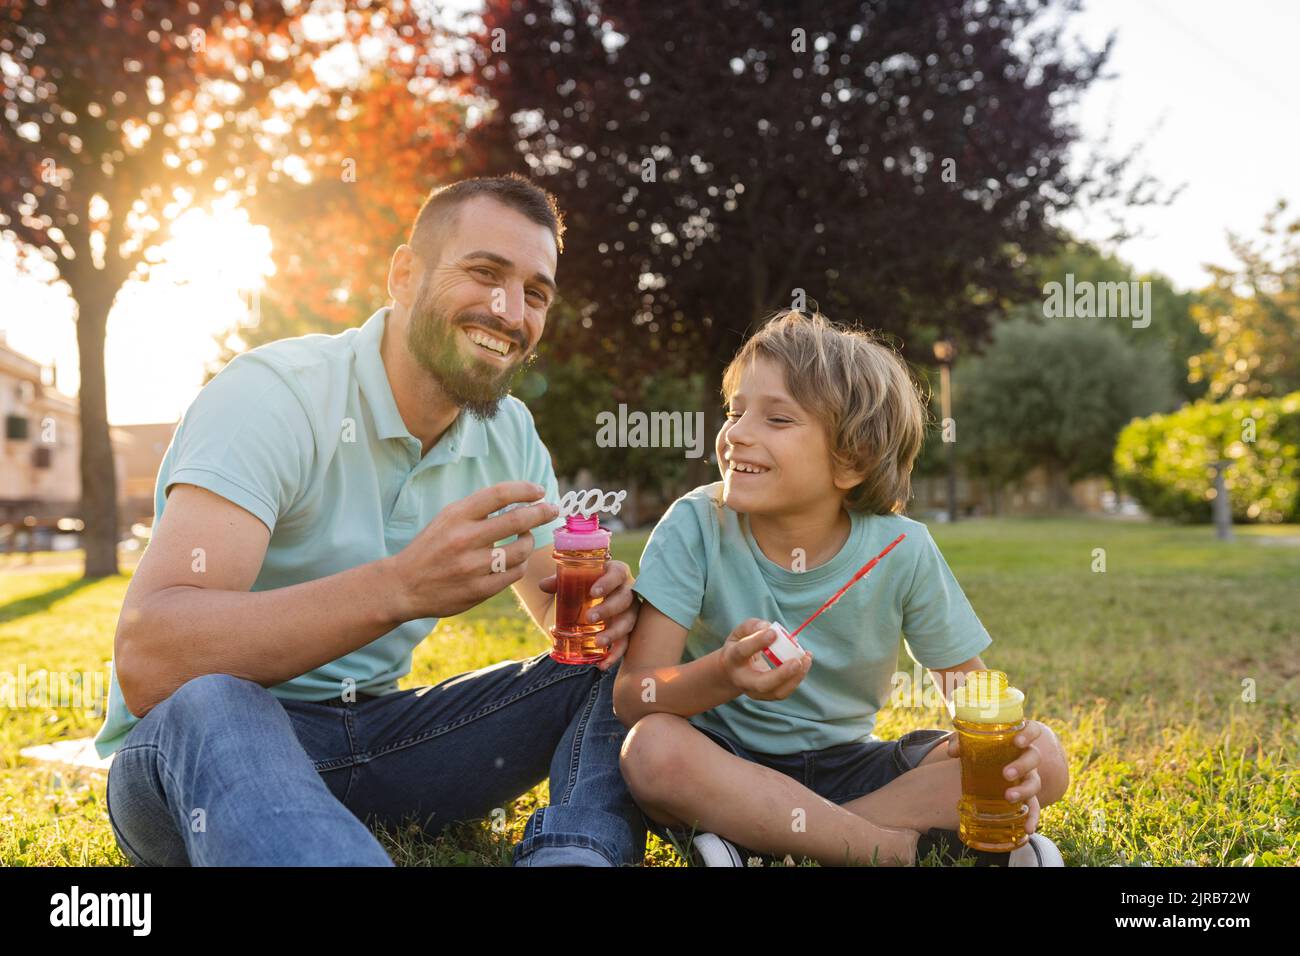 Smiling father and son with bubble wands sitting at park Stock Photo